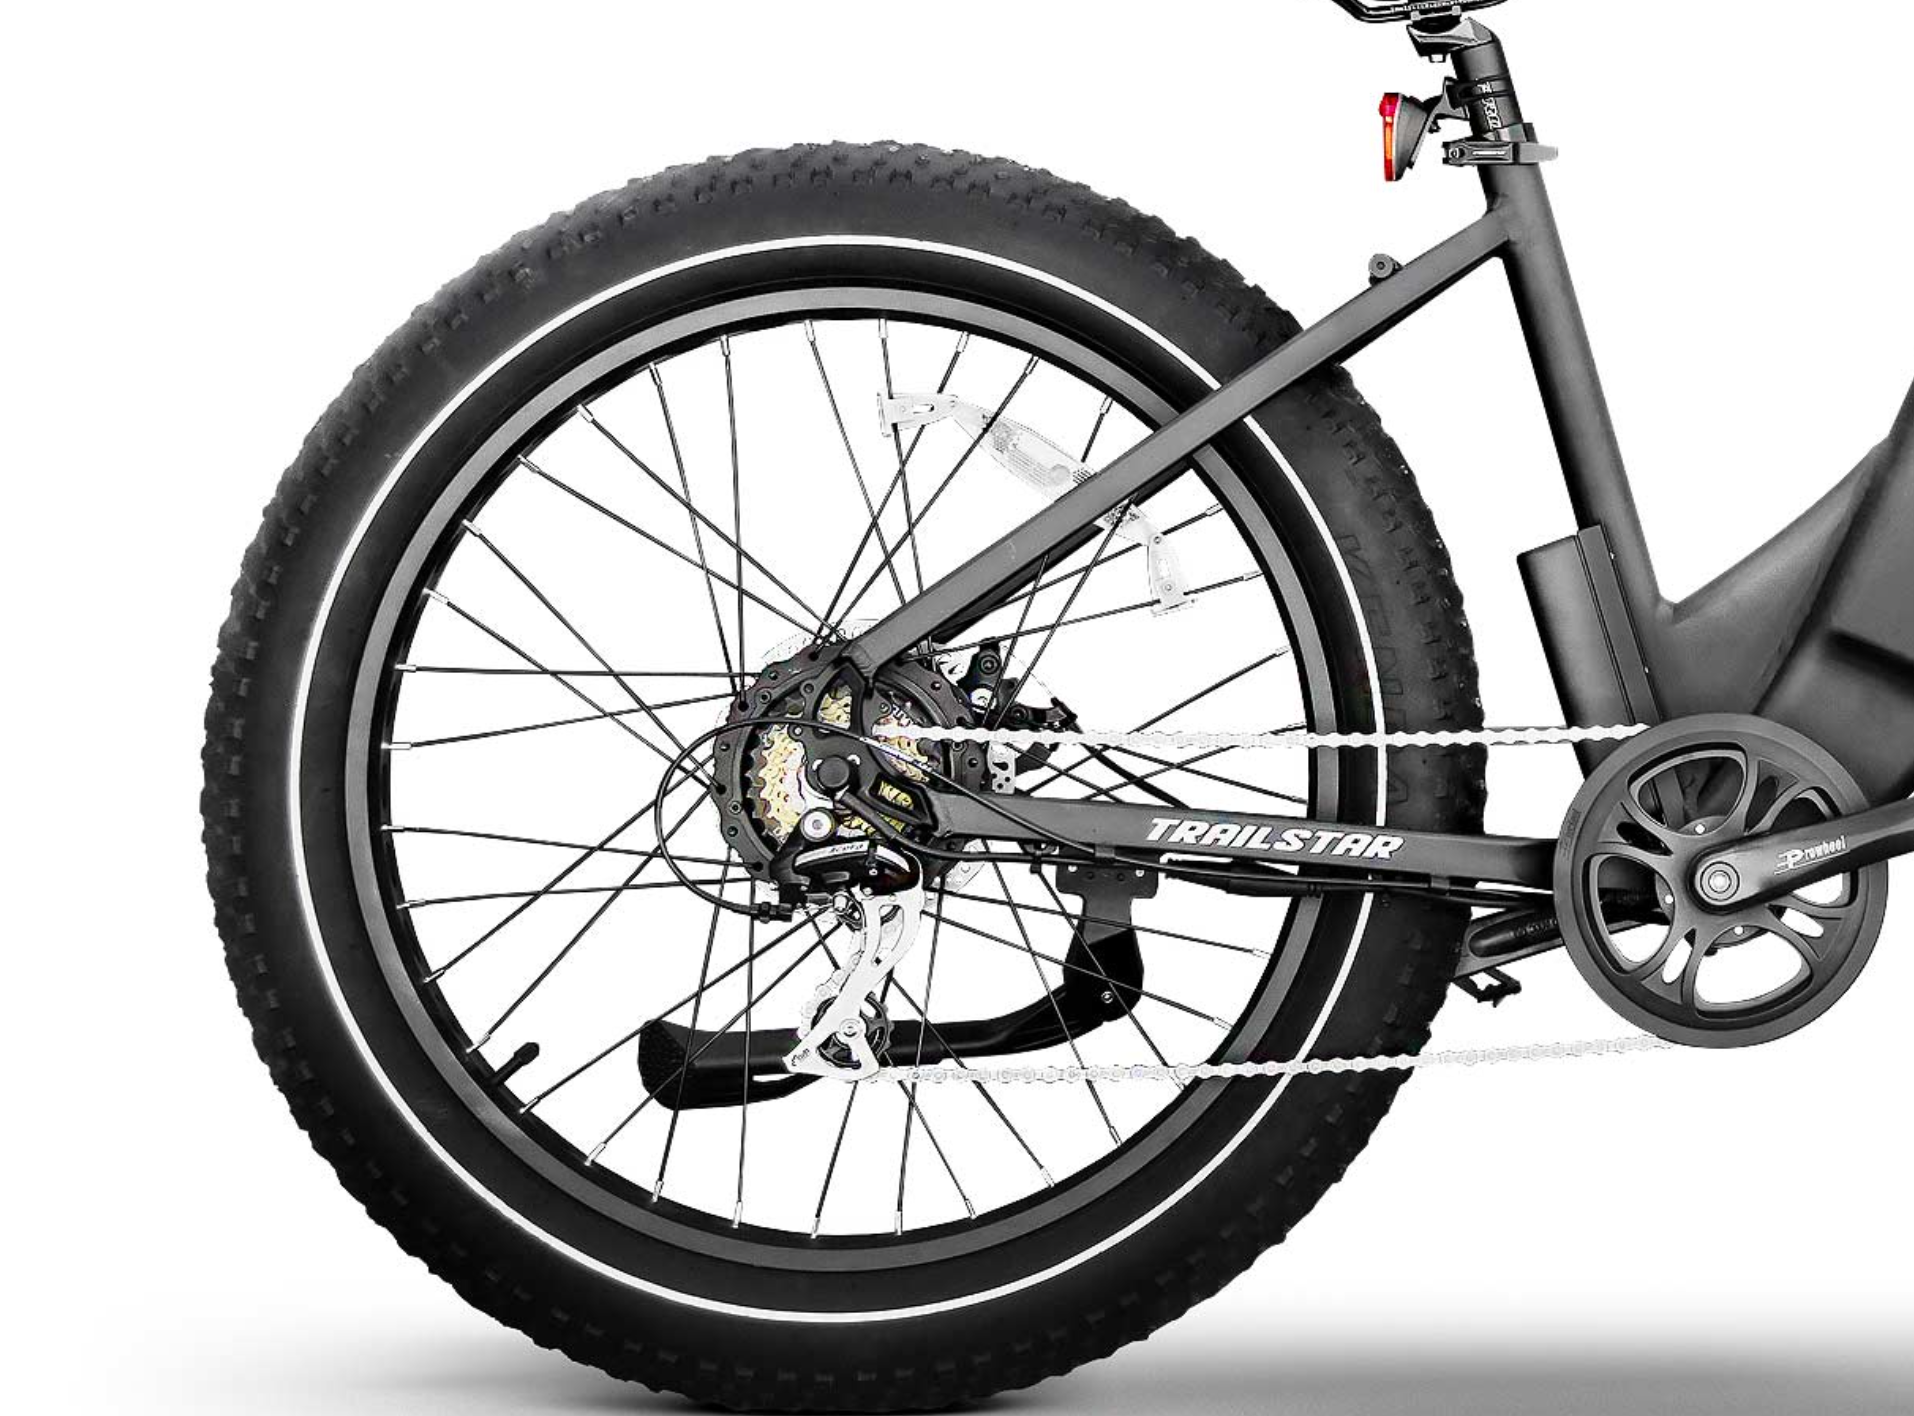 New 2022 Scootstar Trailstar 750W | Electric Bicycle in Kailua